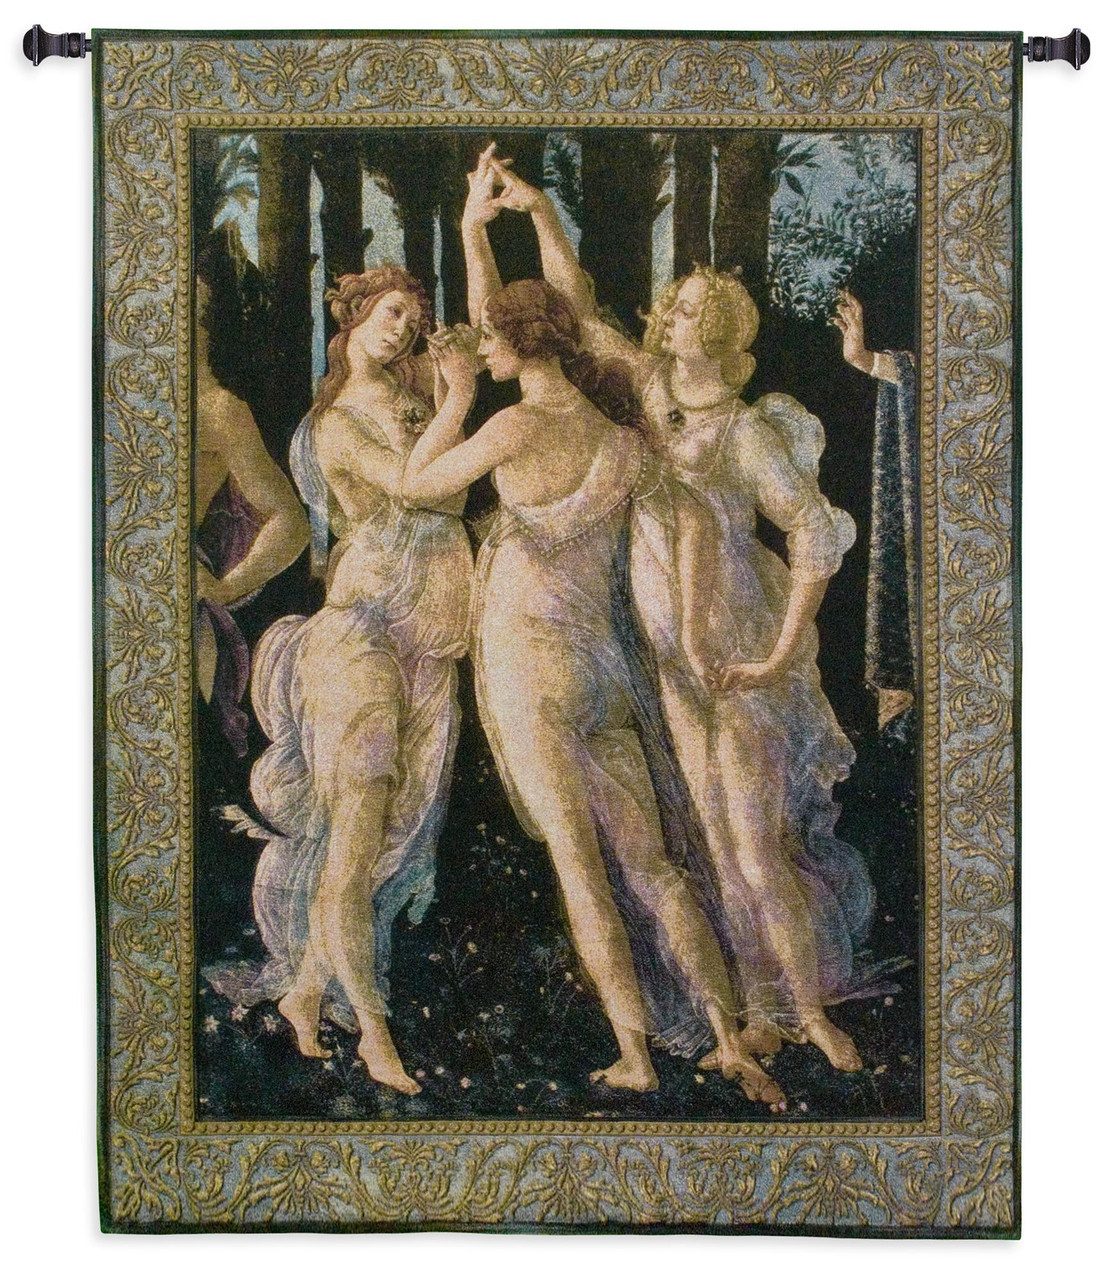 Primavera the Three Graces by Sandro Botticelli Woven Tapestry Wall Art  Hanging Renaissance Mythology Allegory of Spring 100% Cotton USA Size  53x41